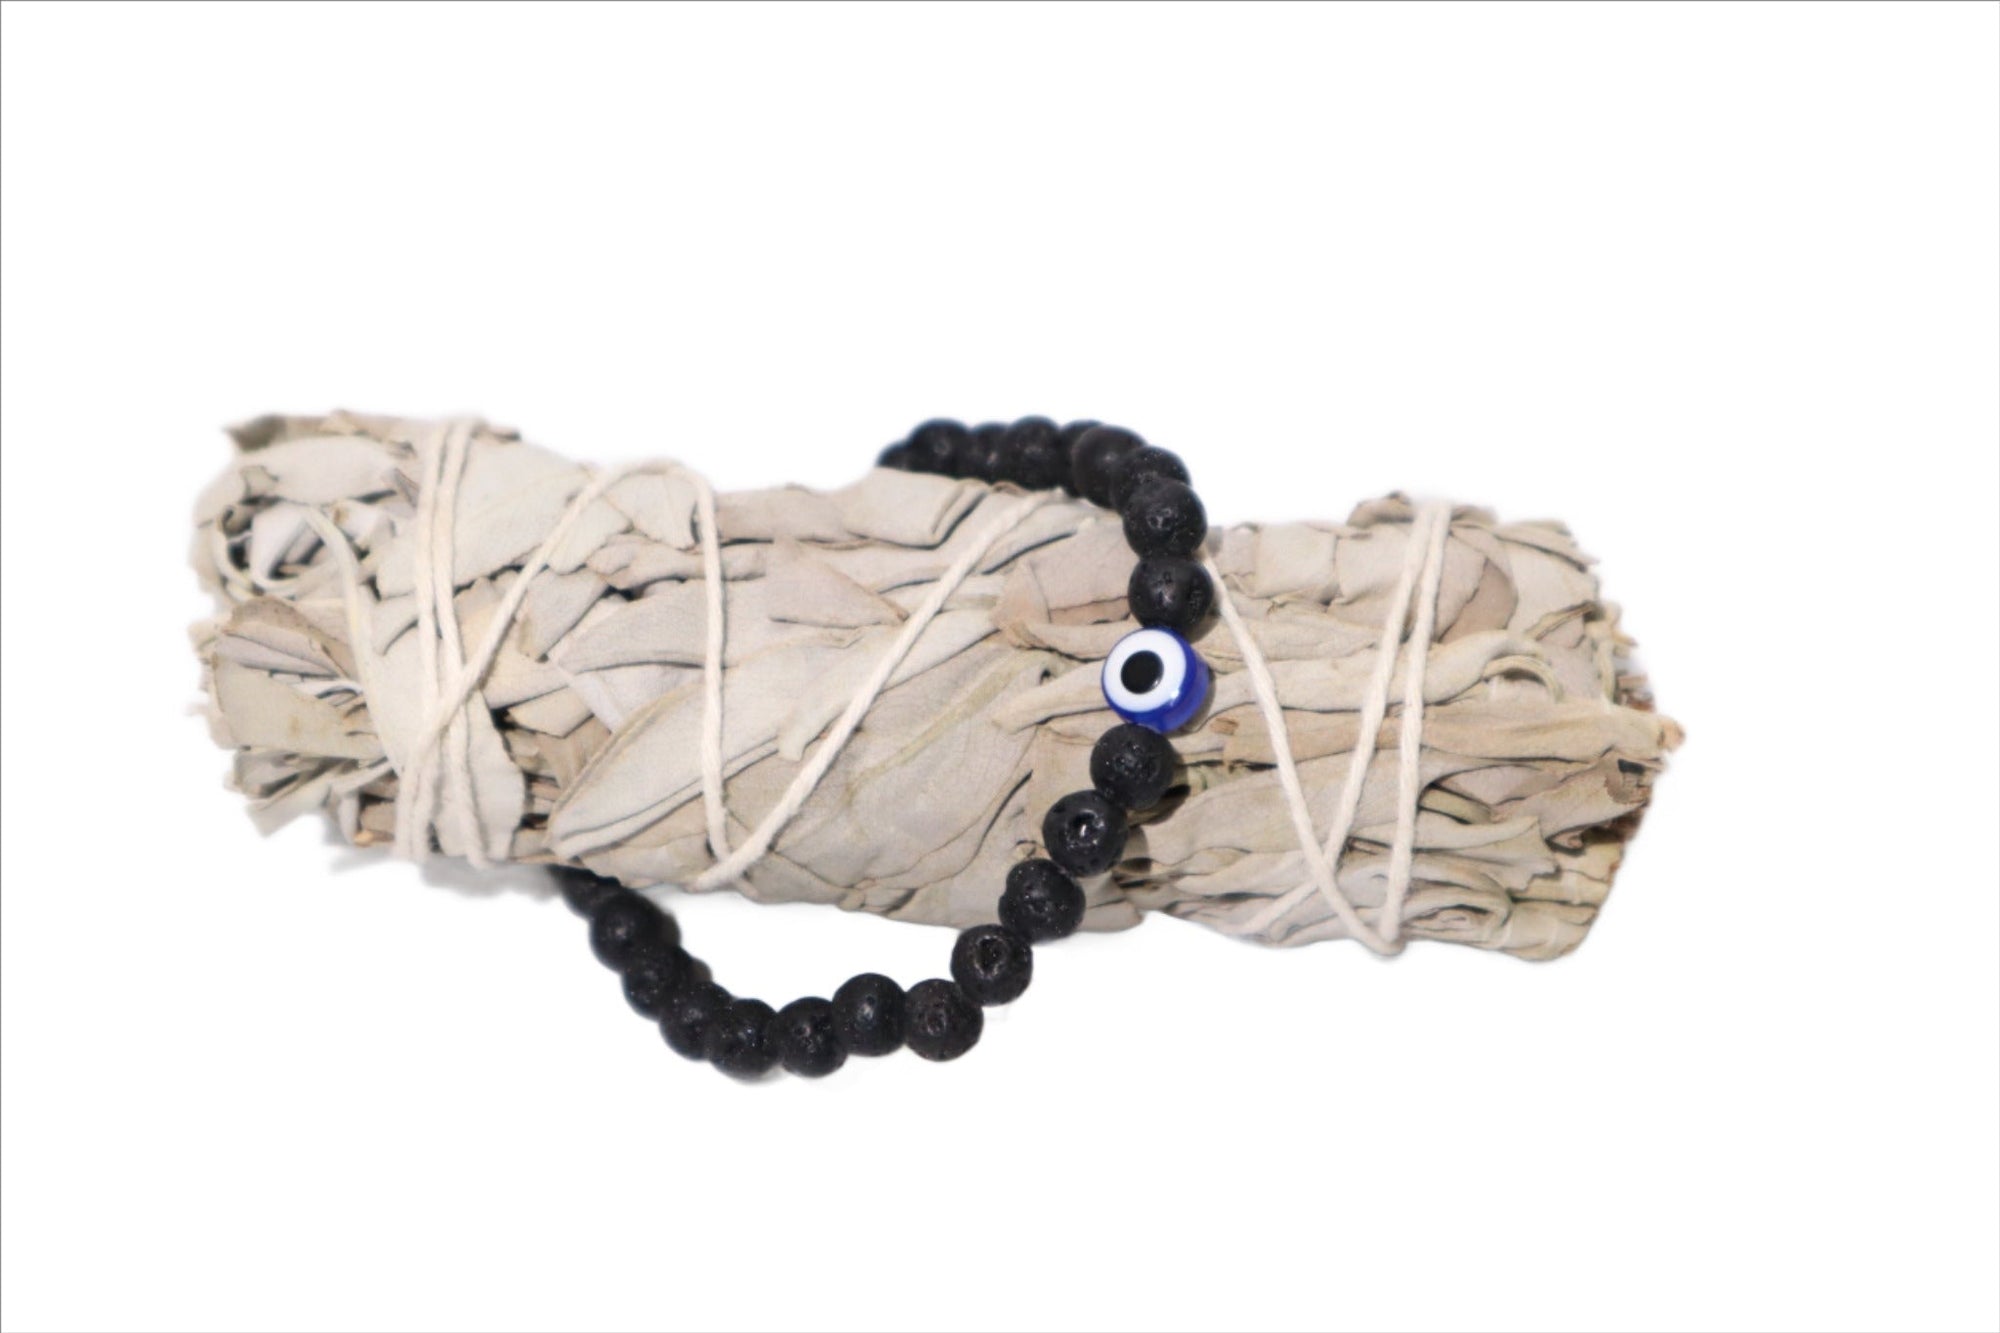 Lava Stone with Blue Evil Eye for Protection - Shop Cosmic Healing